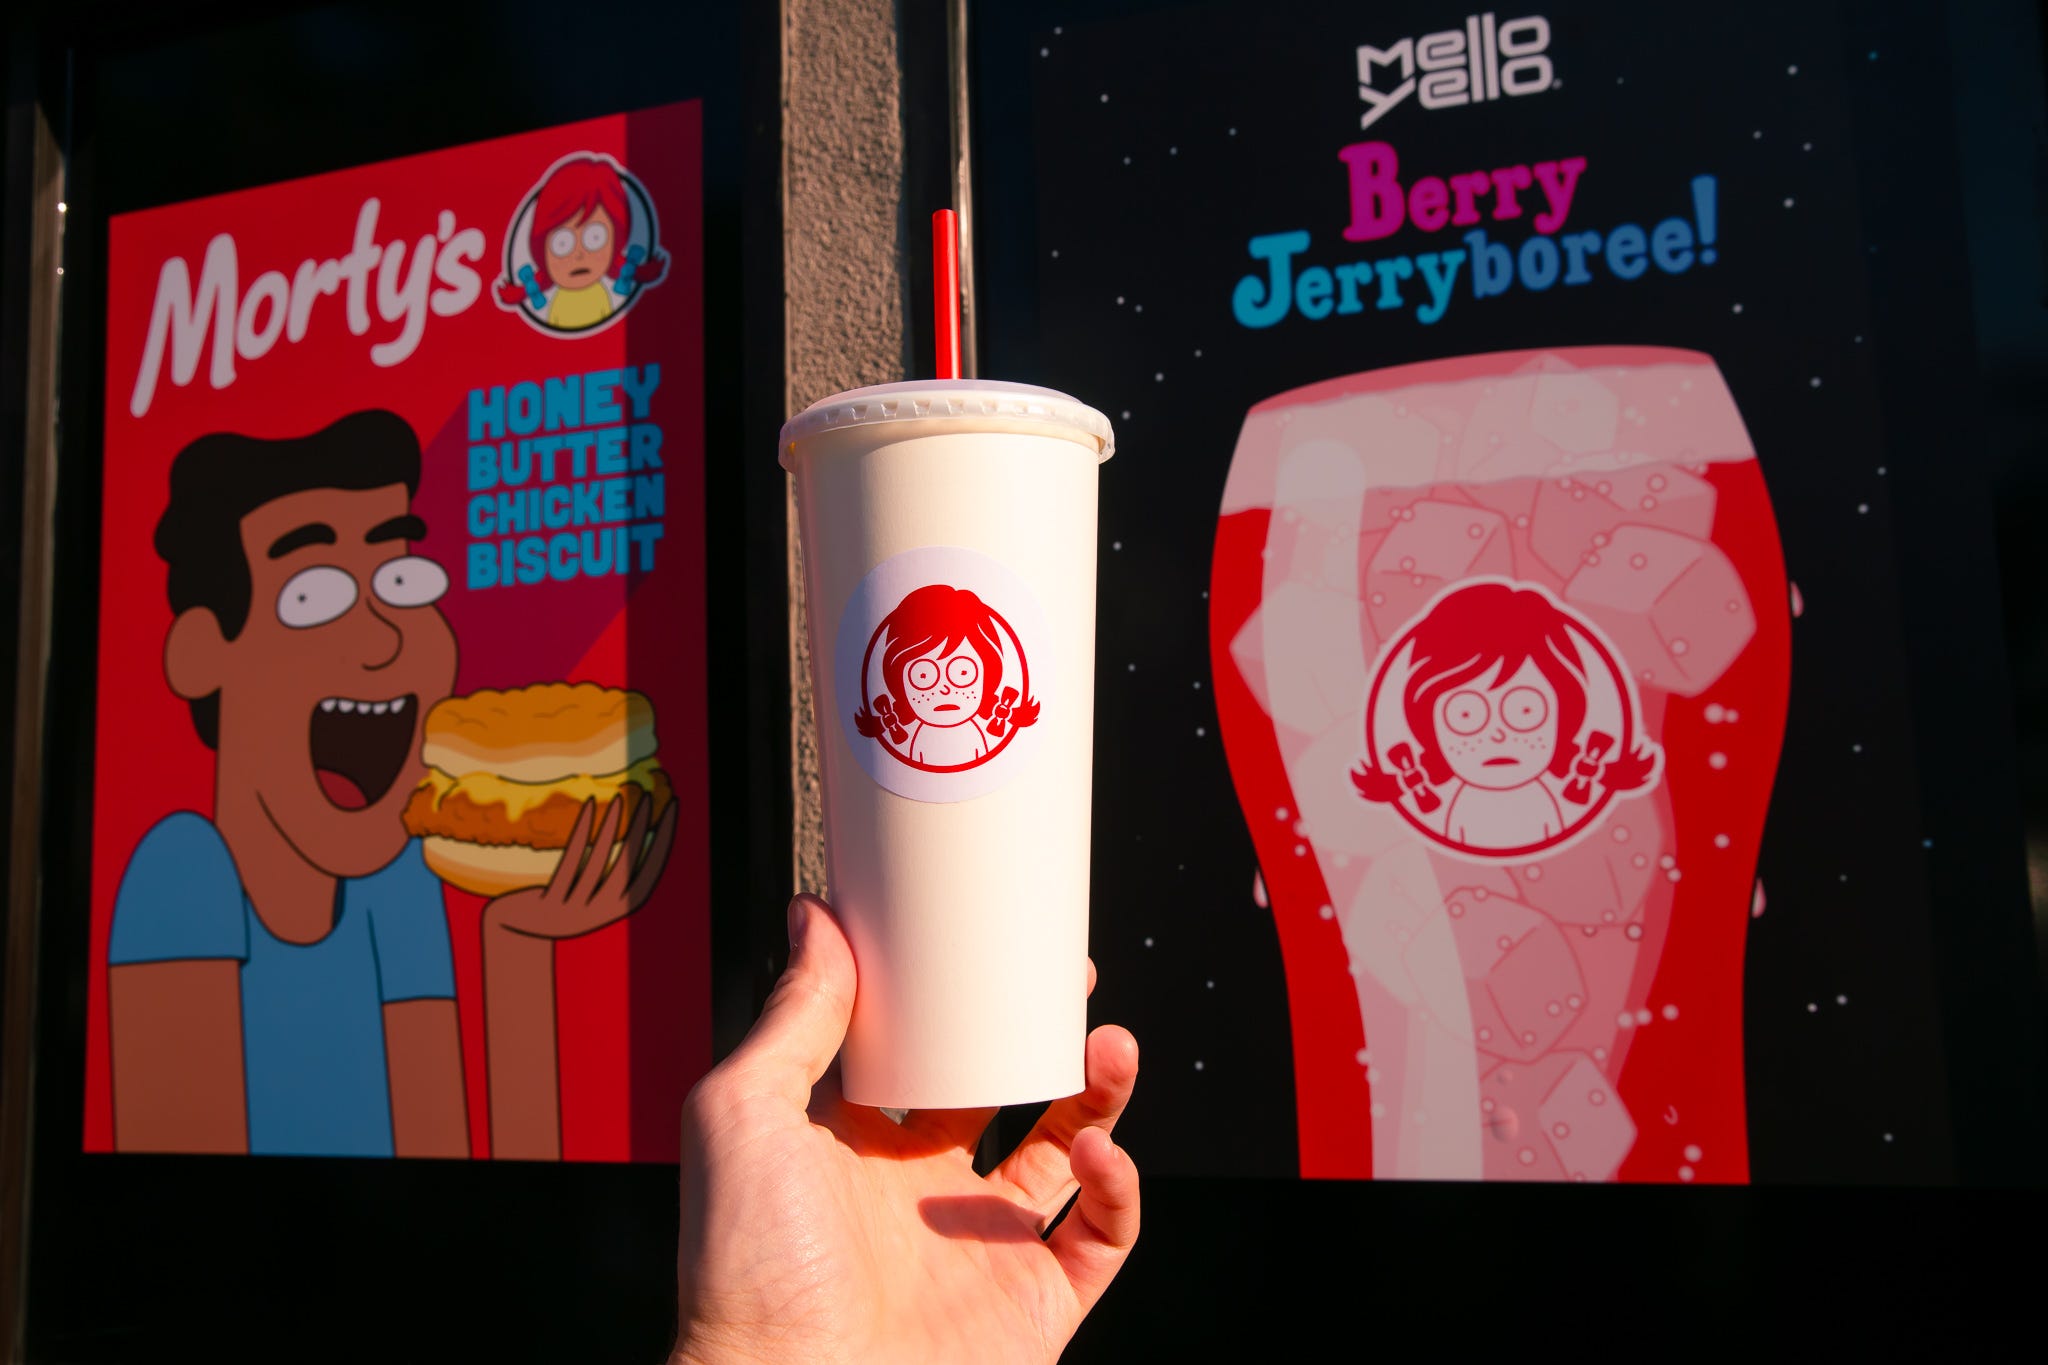 Wendy's launched a Rick and Morty popup restaurant